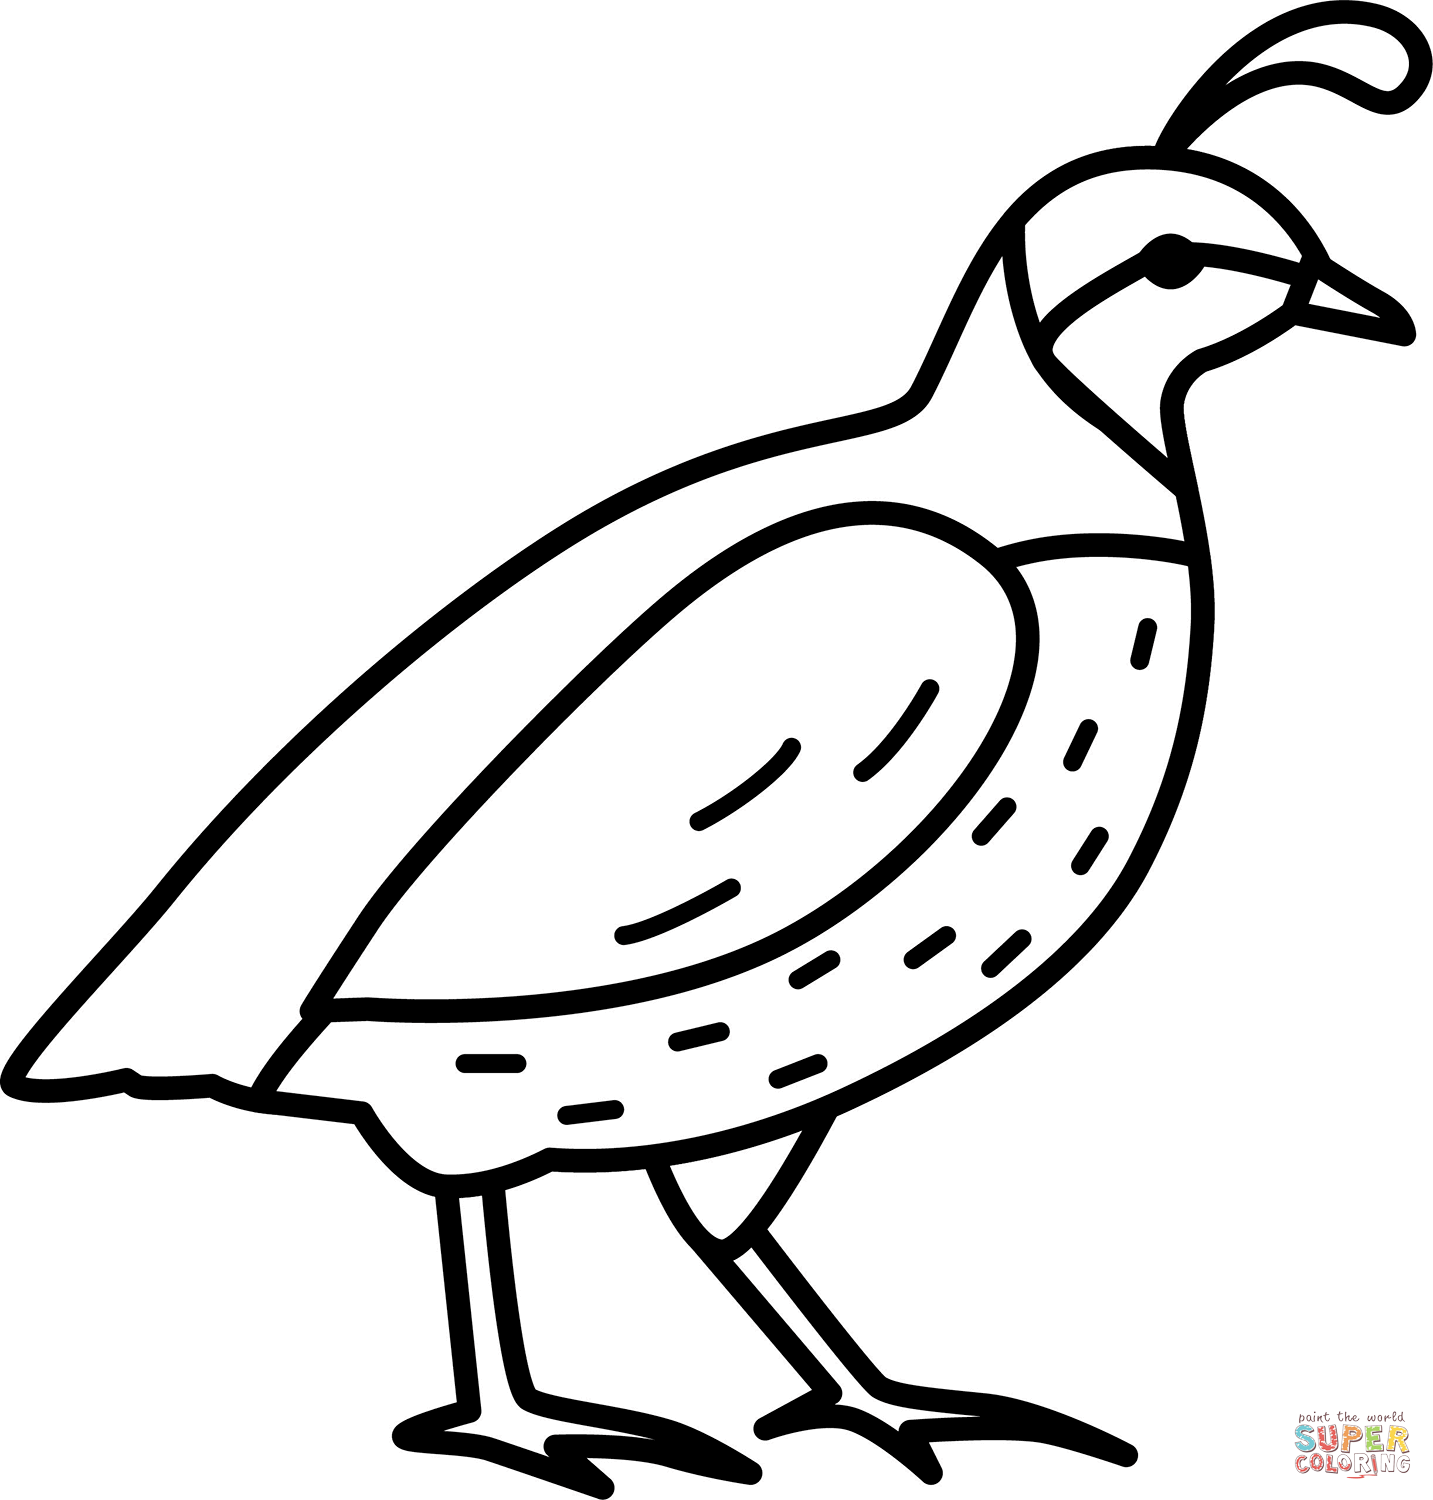 Quail coloring page free printable coloring pages